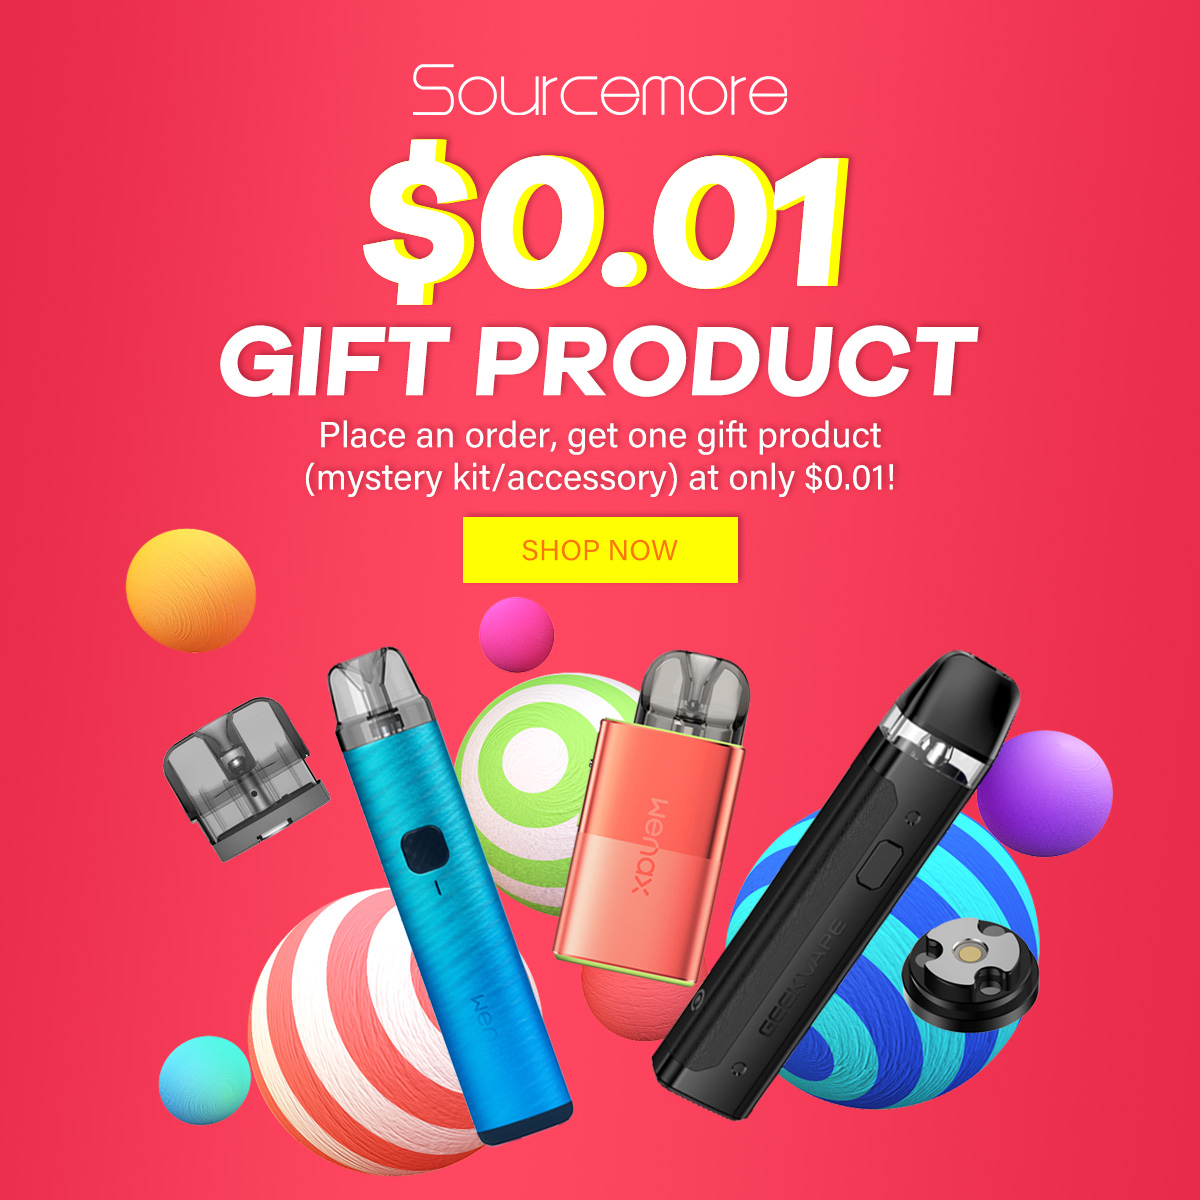 Sourcemore $0.01 Gift Product Sale🔥🔥

👏Place an order, get one mystery kit/accessory at only $0.01!
⏪Sale Link: sourcemore.com/2024-gift-prod…

We reserve all the rights for final explanation.
Feel free to write to us at service@sourcemore.com if you have any doubts.🥰